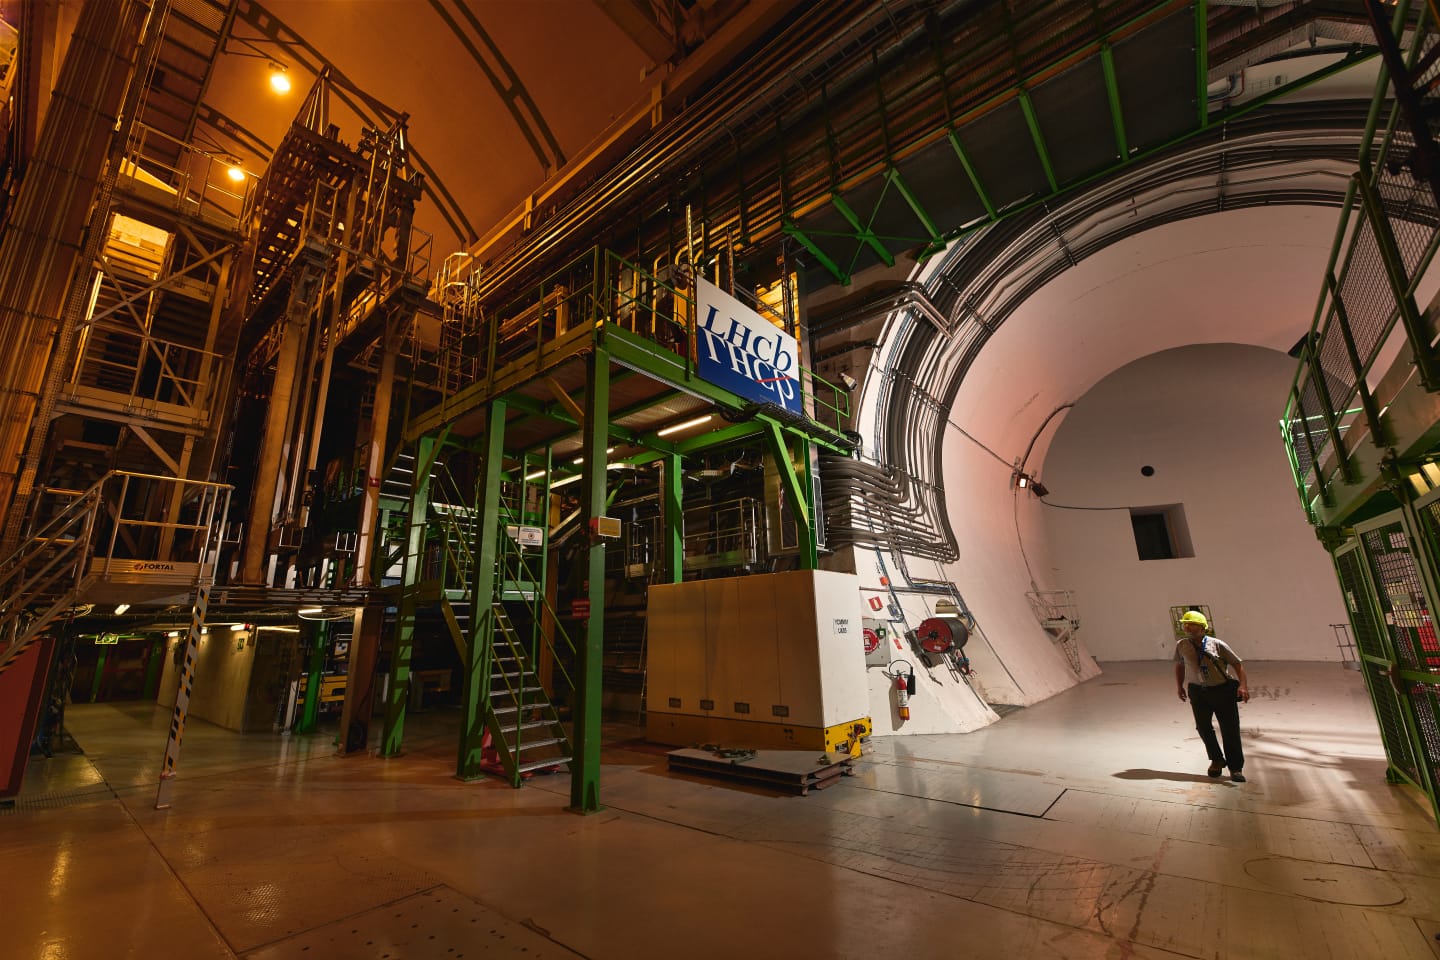 The LHCb experiment at CERN. (Image: CERN)